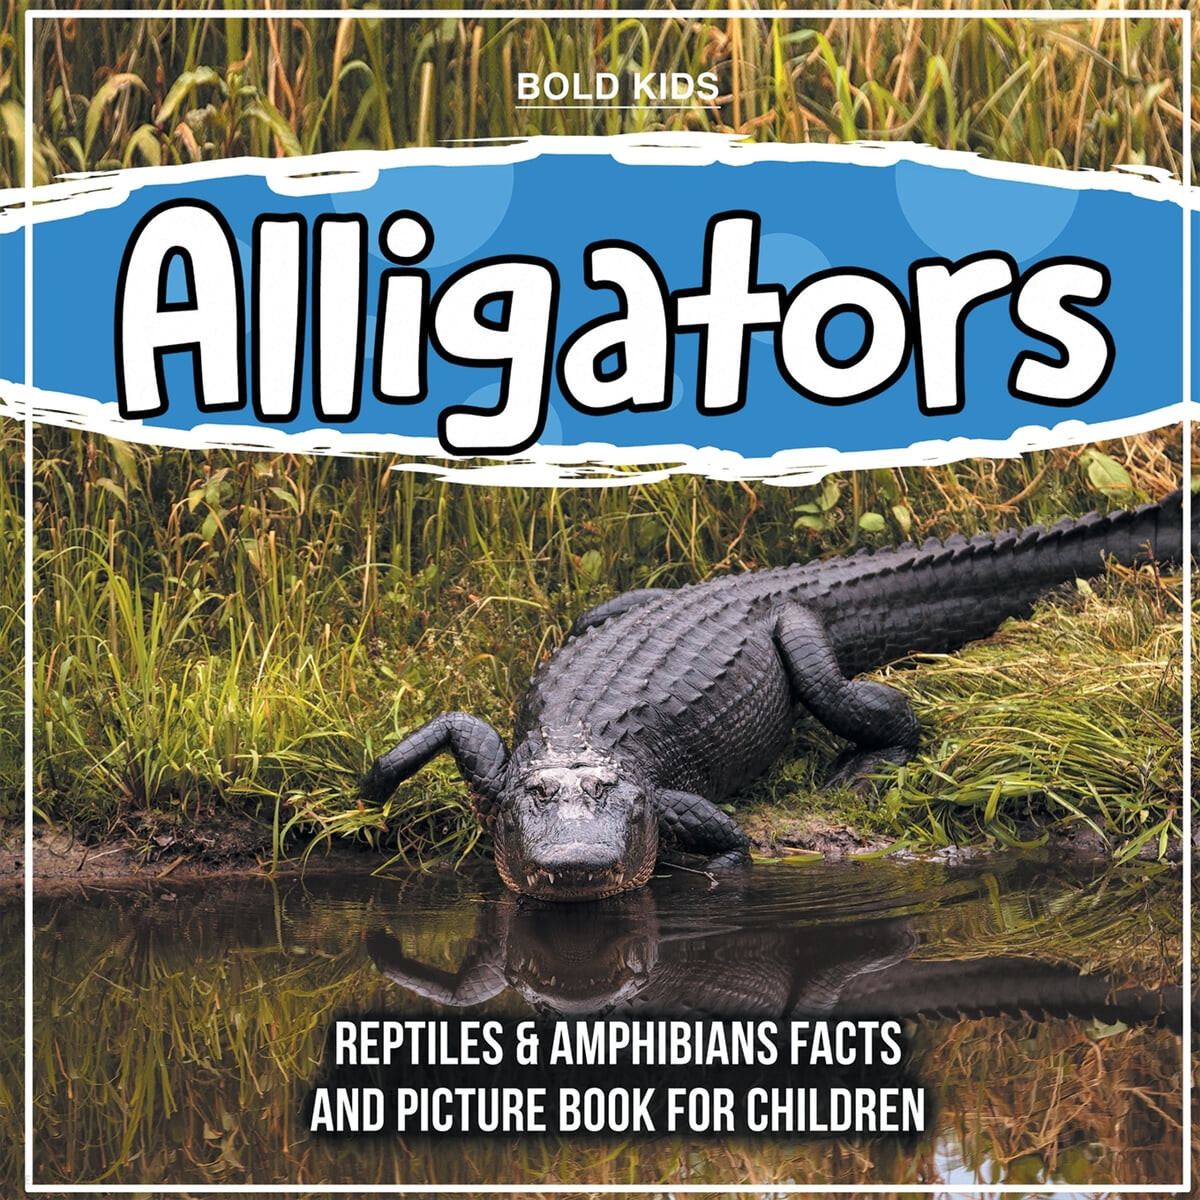 Alligators (Reptiles & Amphibians Facts And Picture Book For Children)